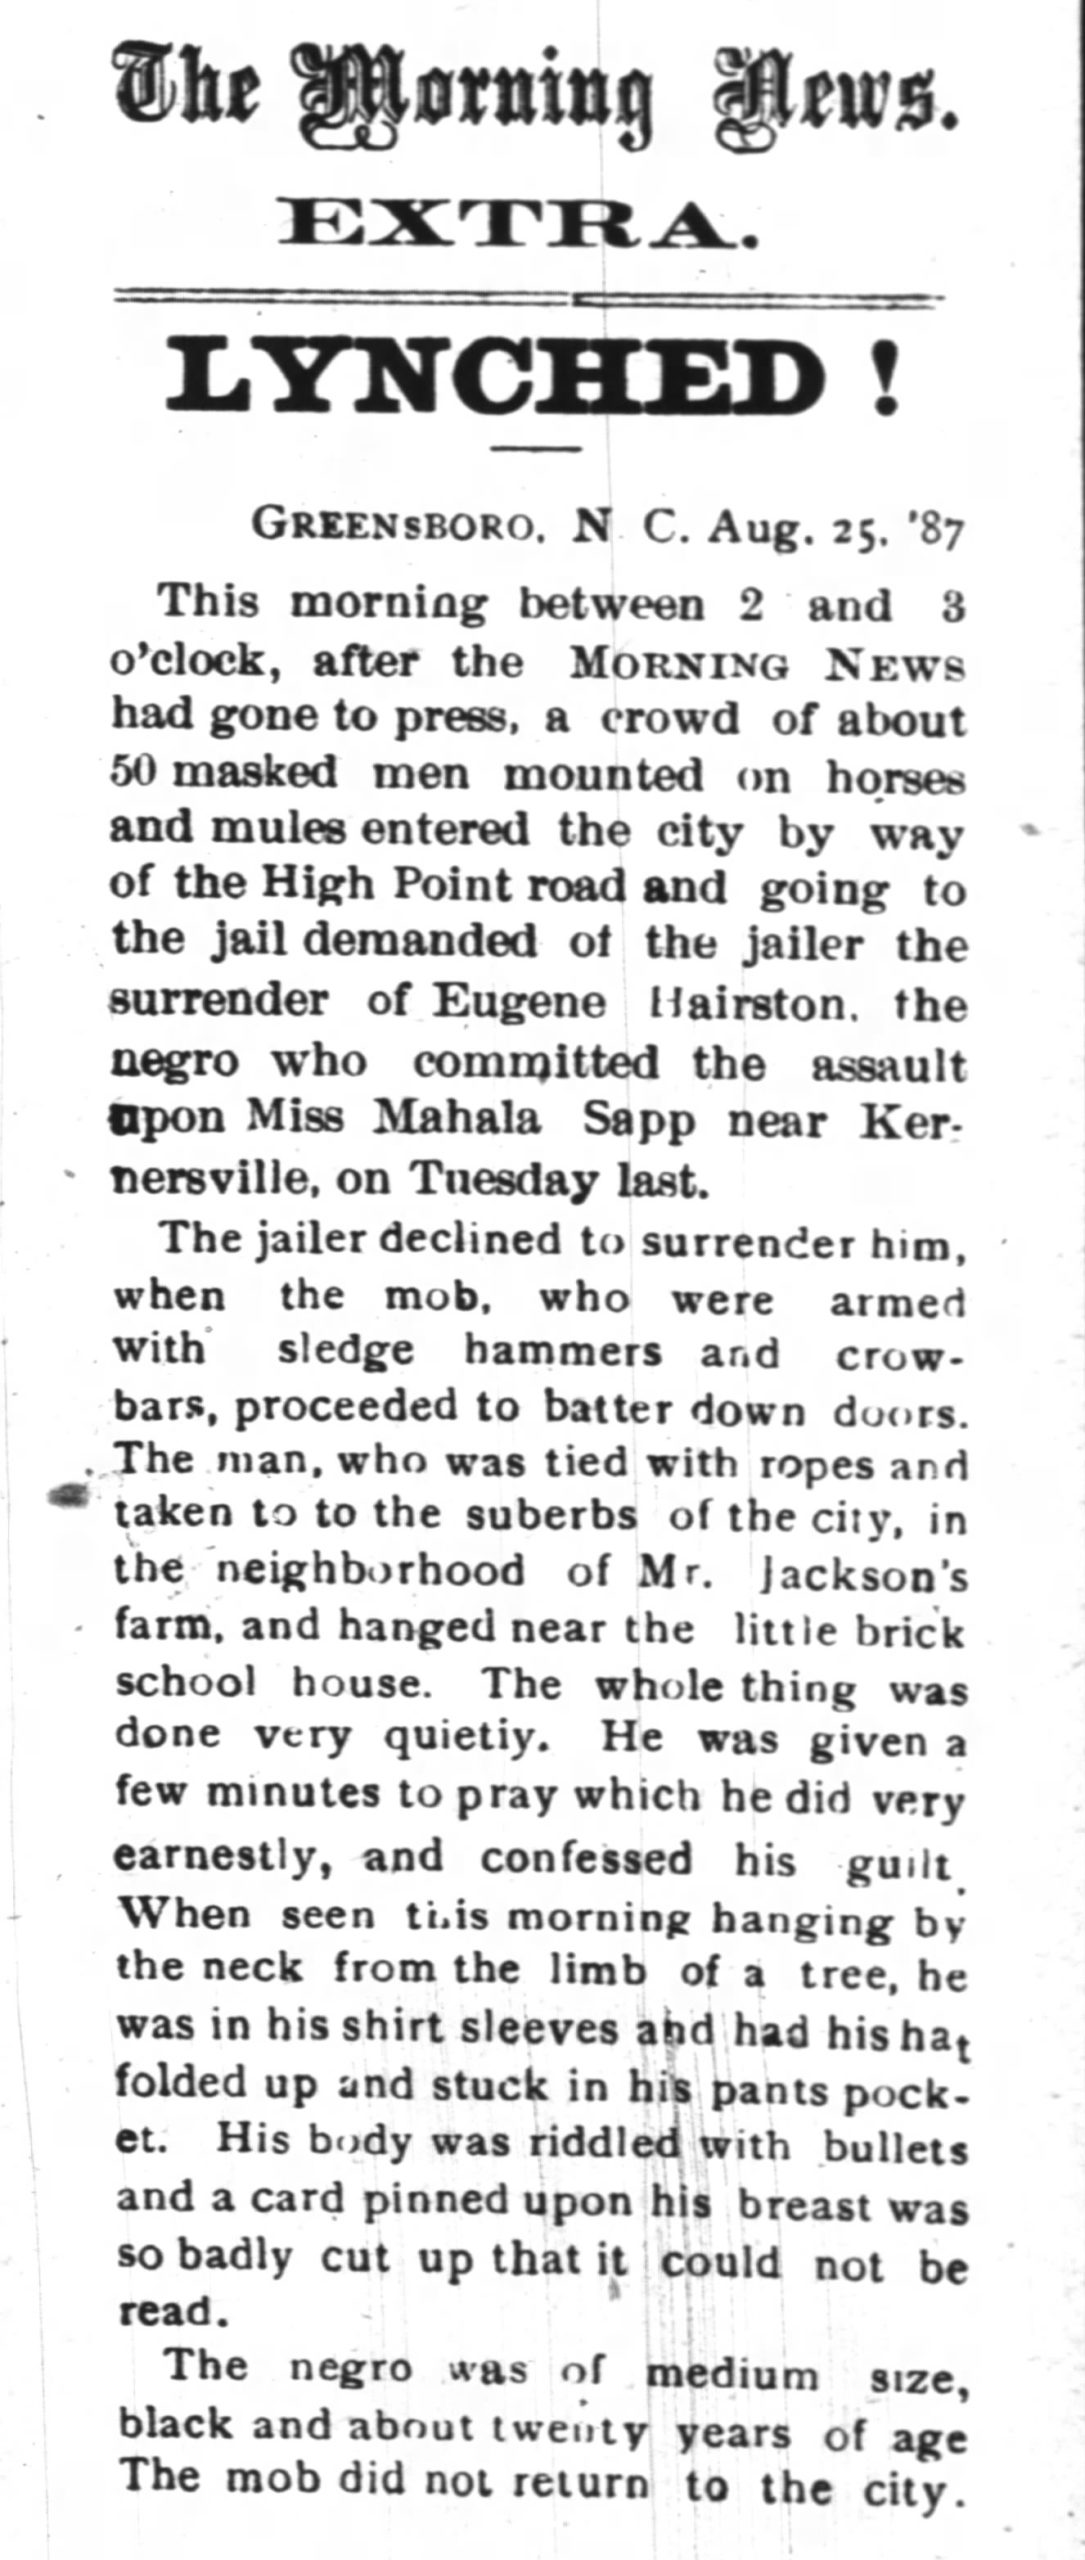 1887 newspaper article reporting the lynching of Eugene Hairston